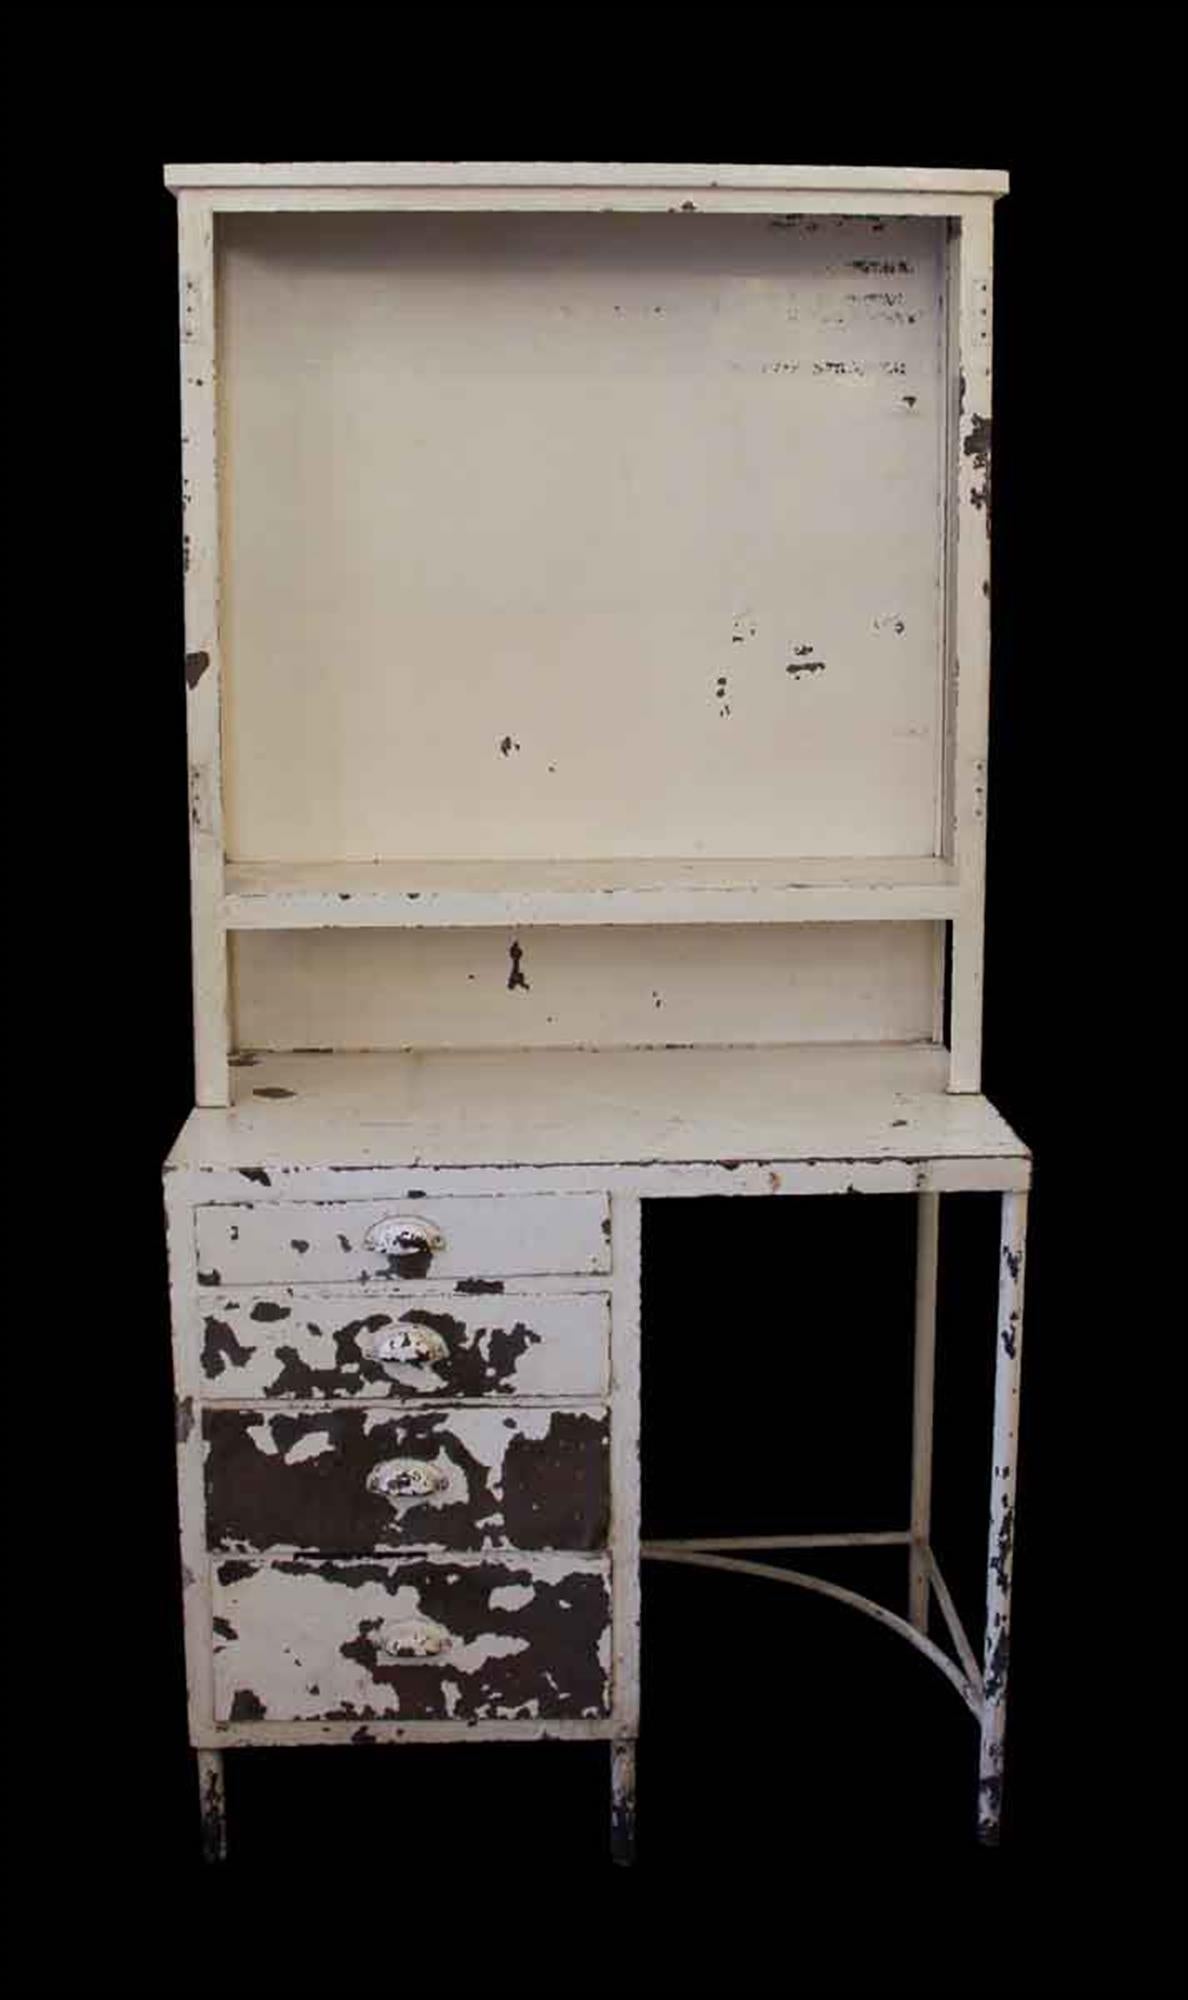 1920s open top medical surgical cabinet or desk. The front doors are missing, but holes are there for the hinges if you want to restore. However, it looks nice open as well, especially for display! Shelves can be made for this if you'd like-please